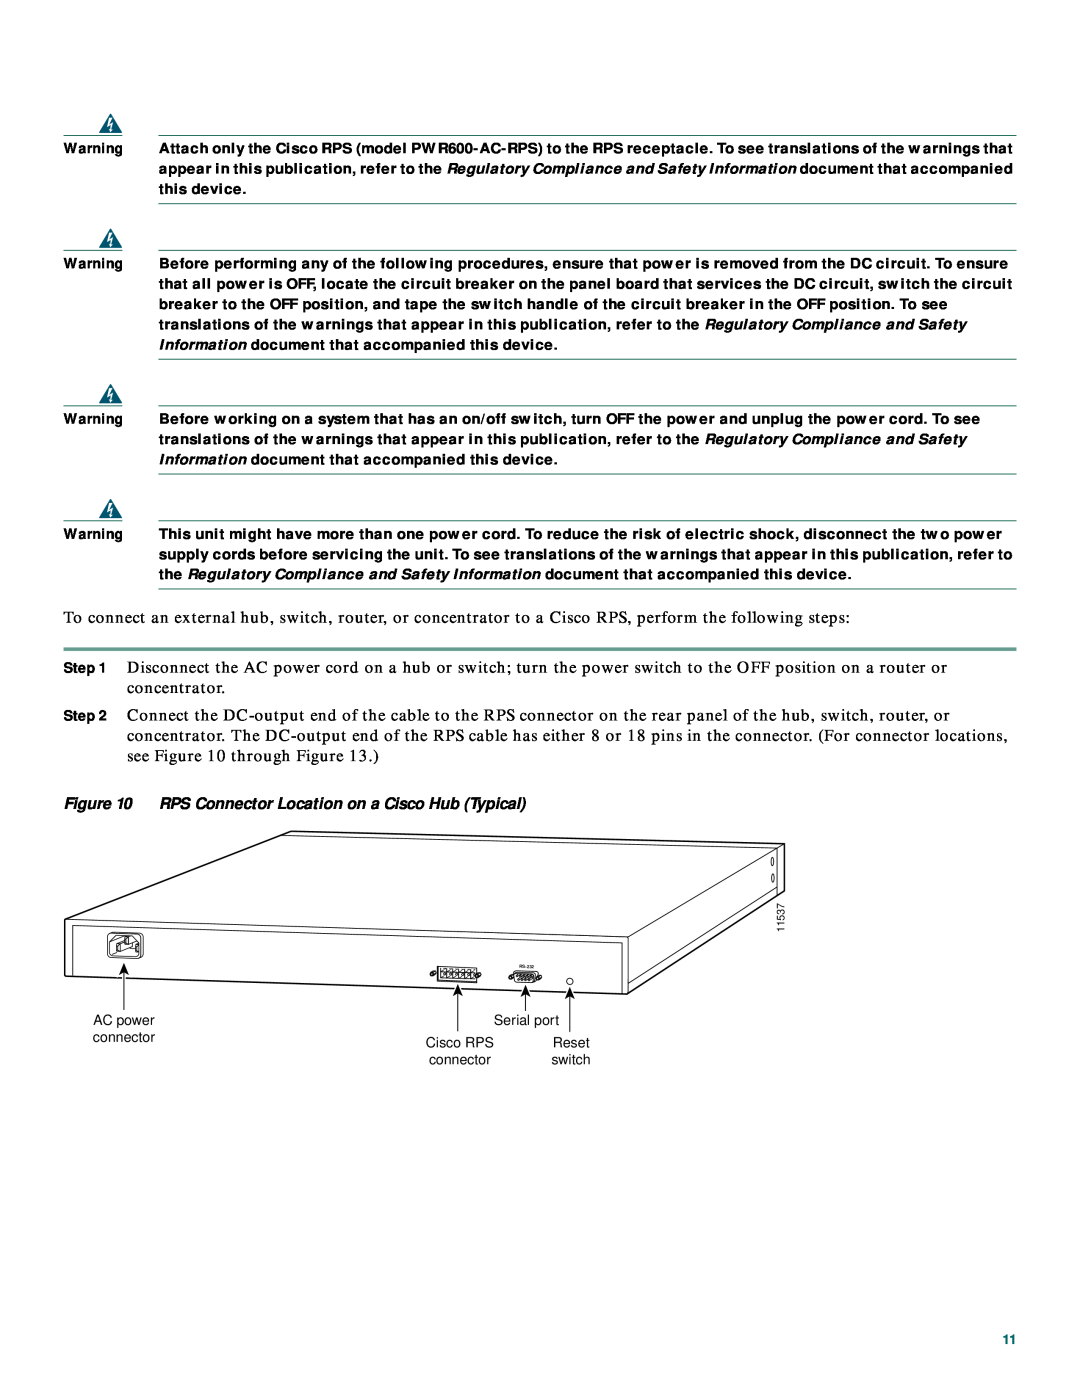 Cisco Systems 600W Information document that accompanied this device, RPS Connector Location on a Cisco Hub Typical 